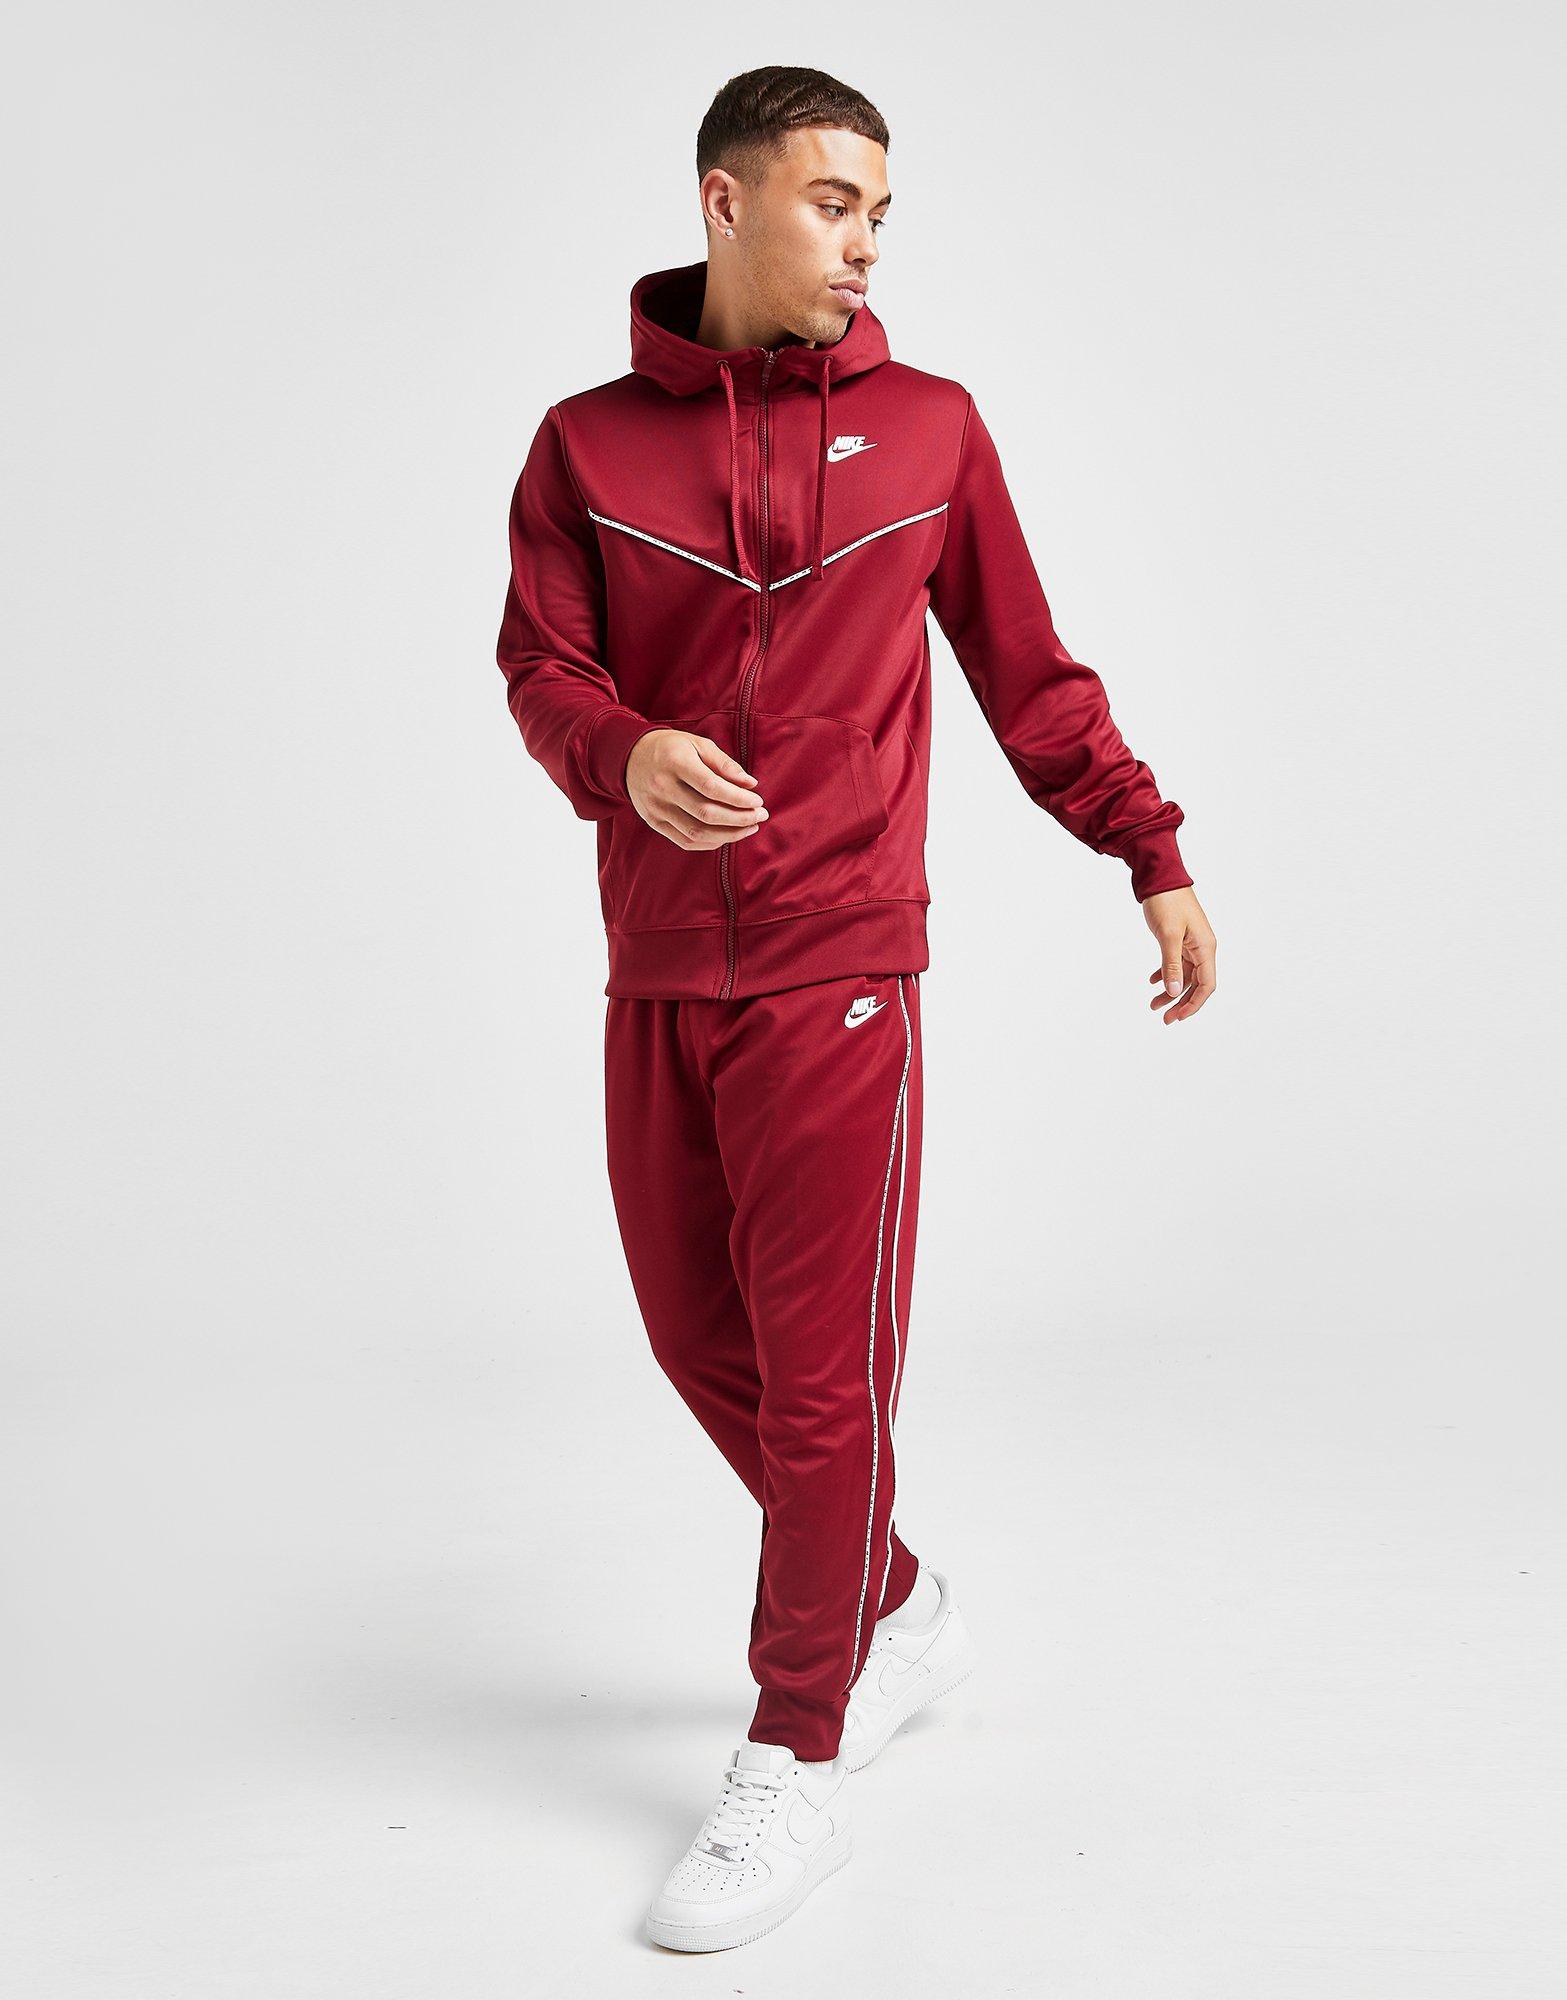 red nike tape tracksuit